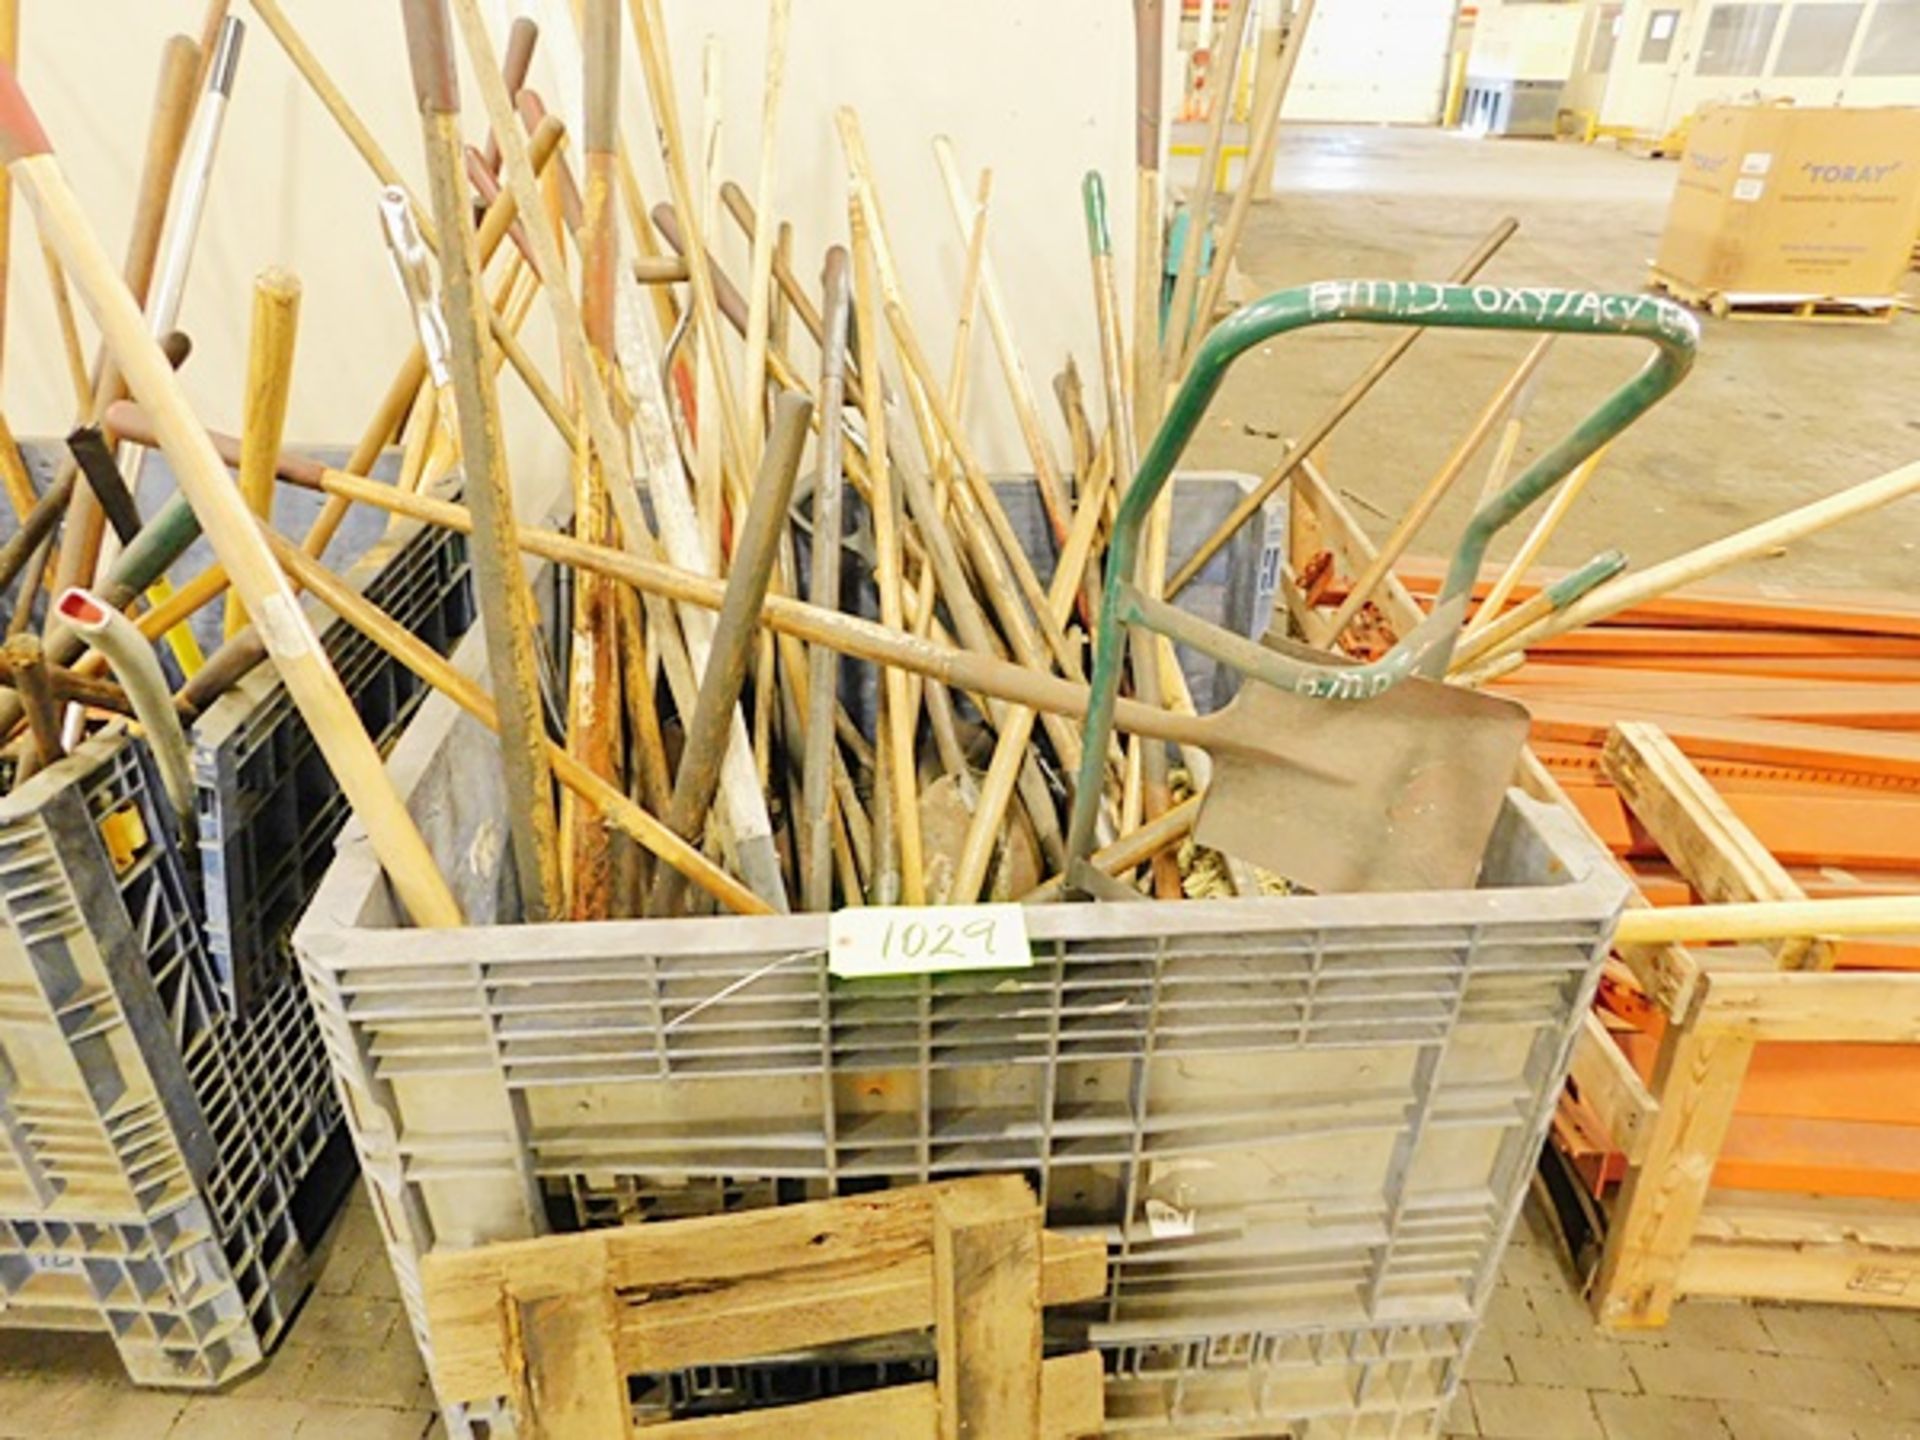 Shovels in Crate